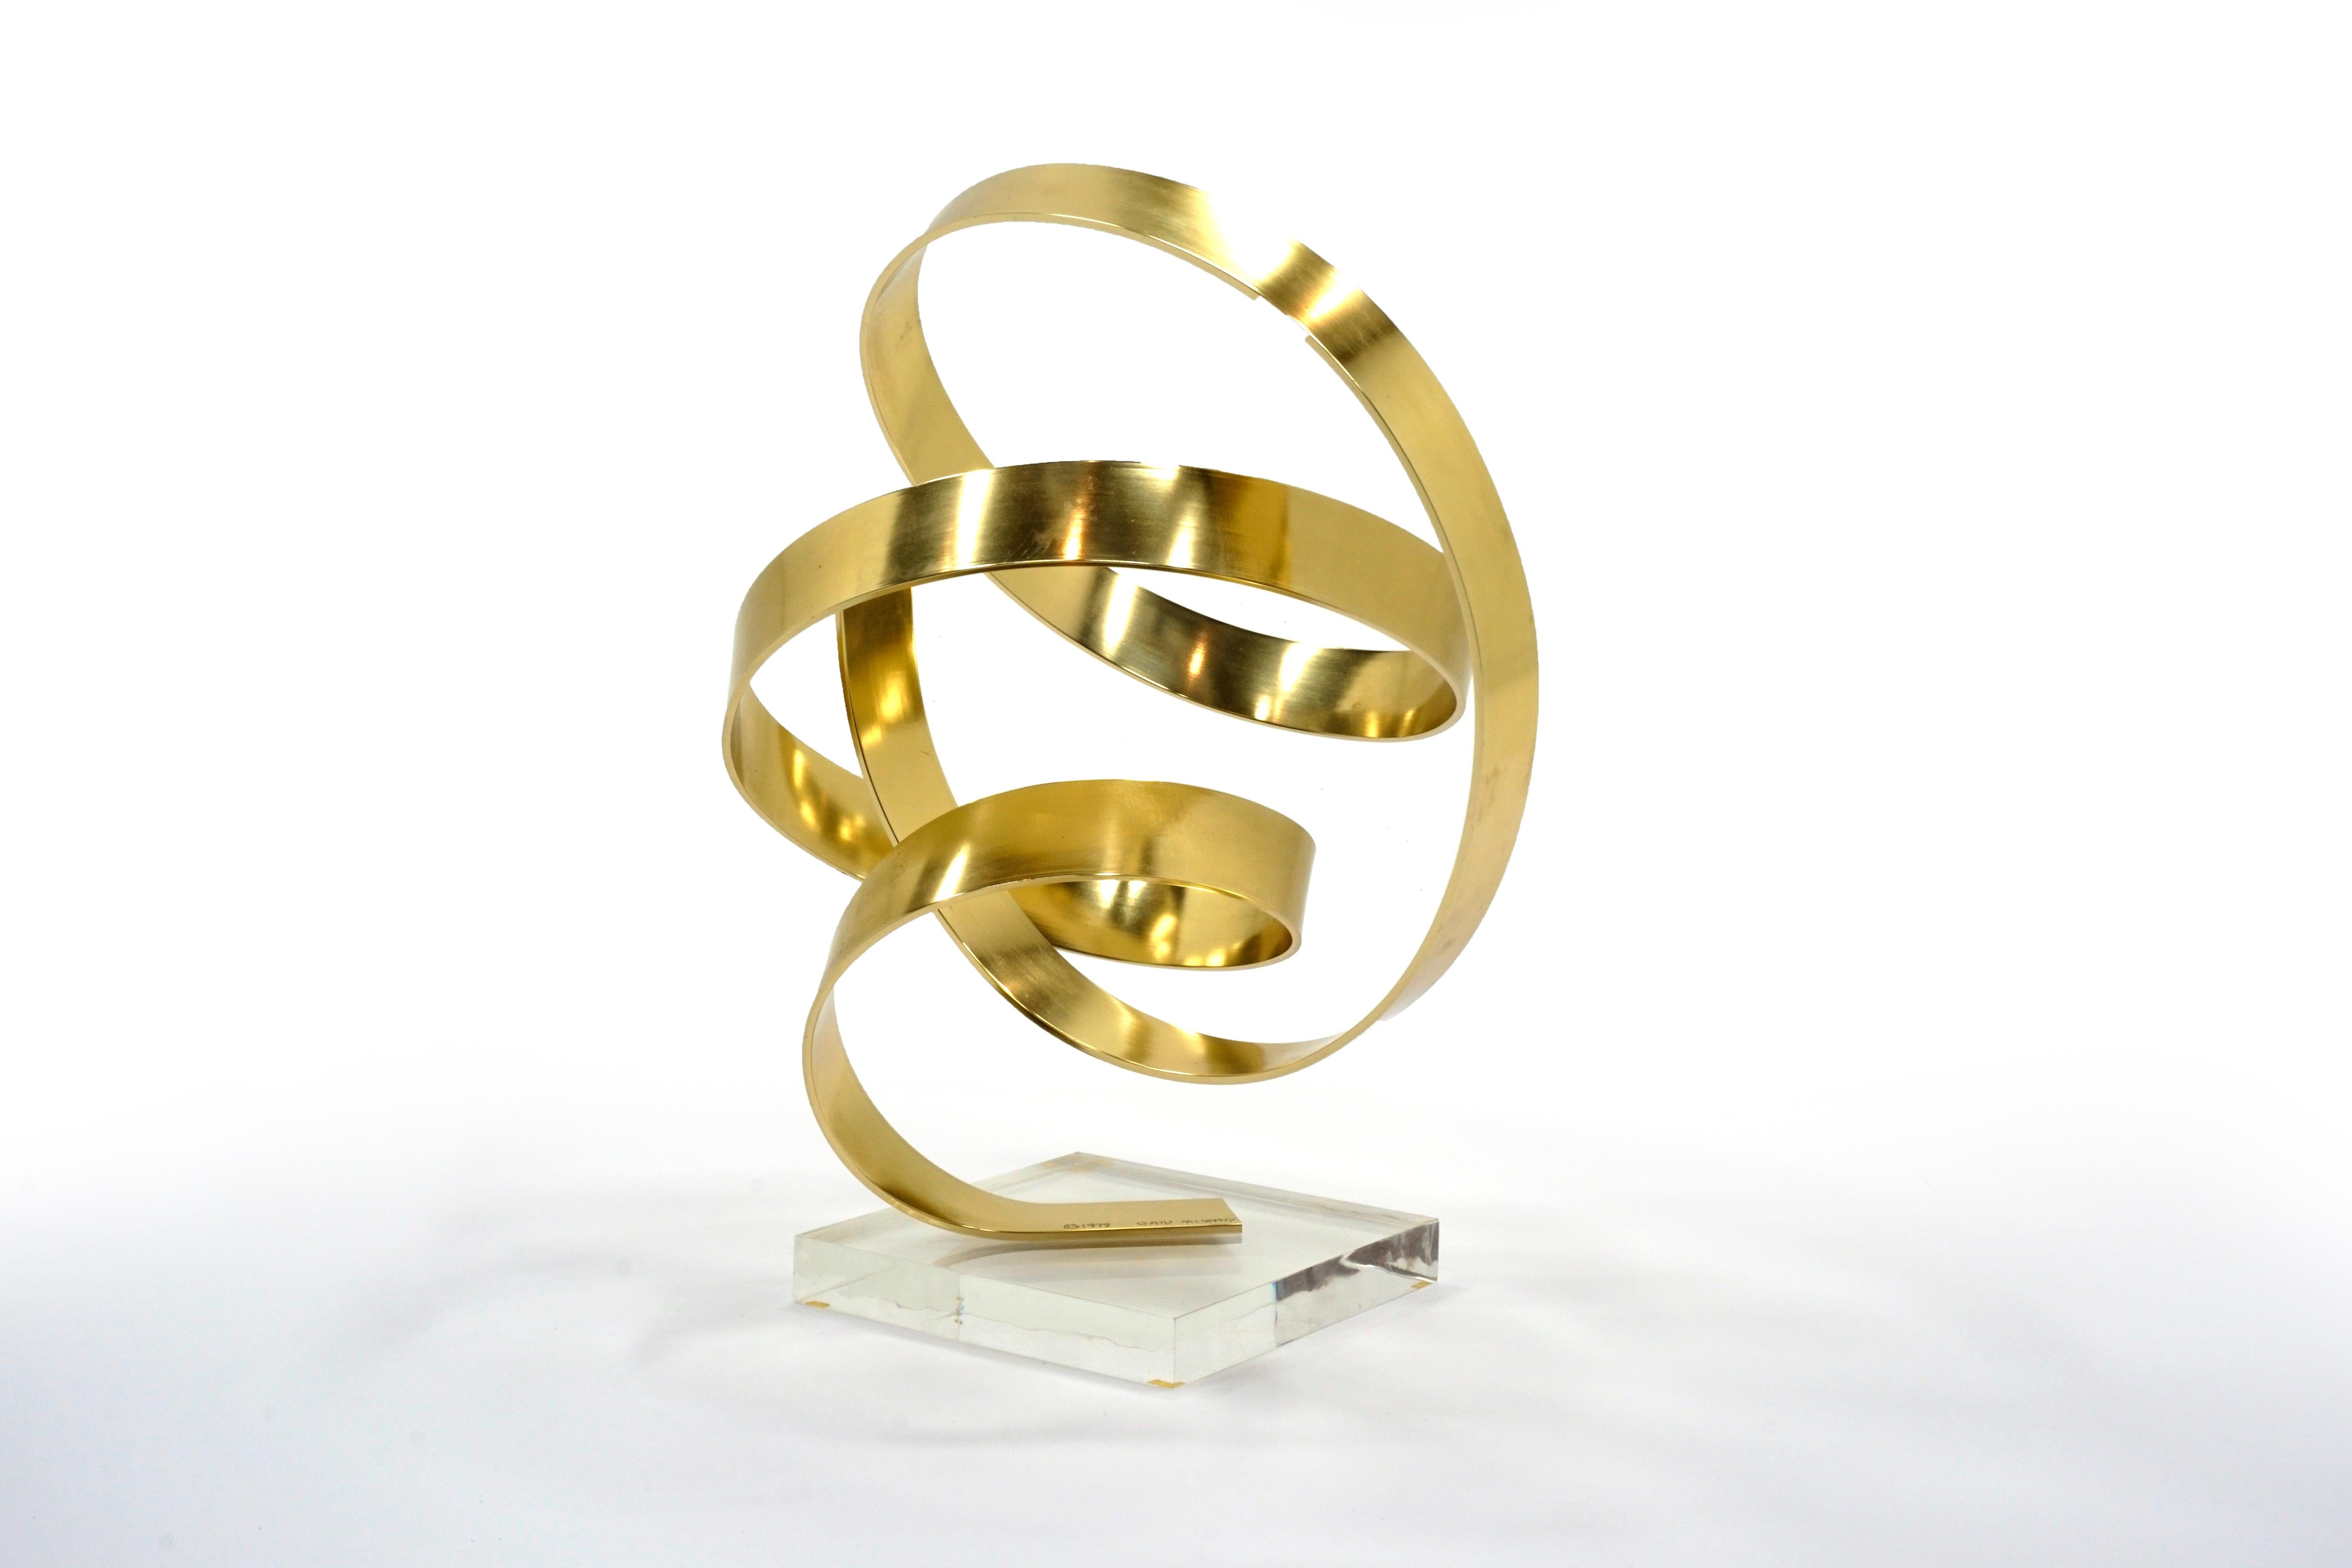 American Brass and Lucite Table Top Abstract Sculpture, Signed & Dated, Dan Murphy, 1979 For Sale